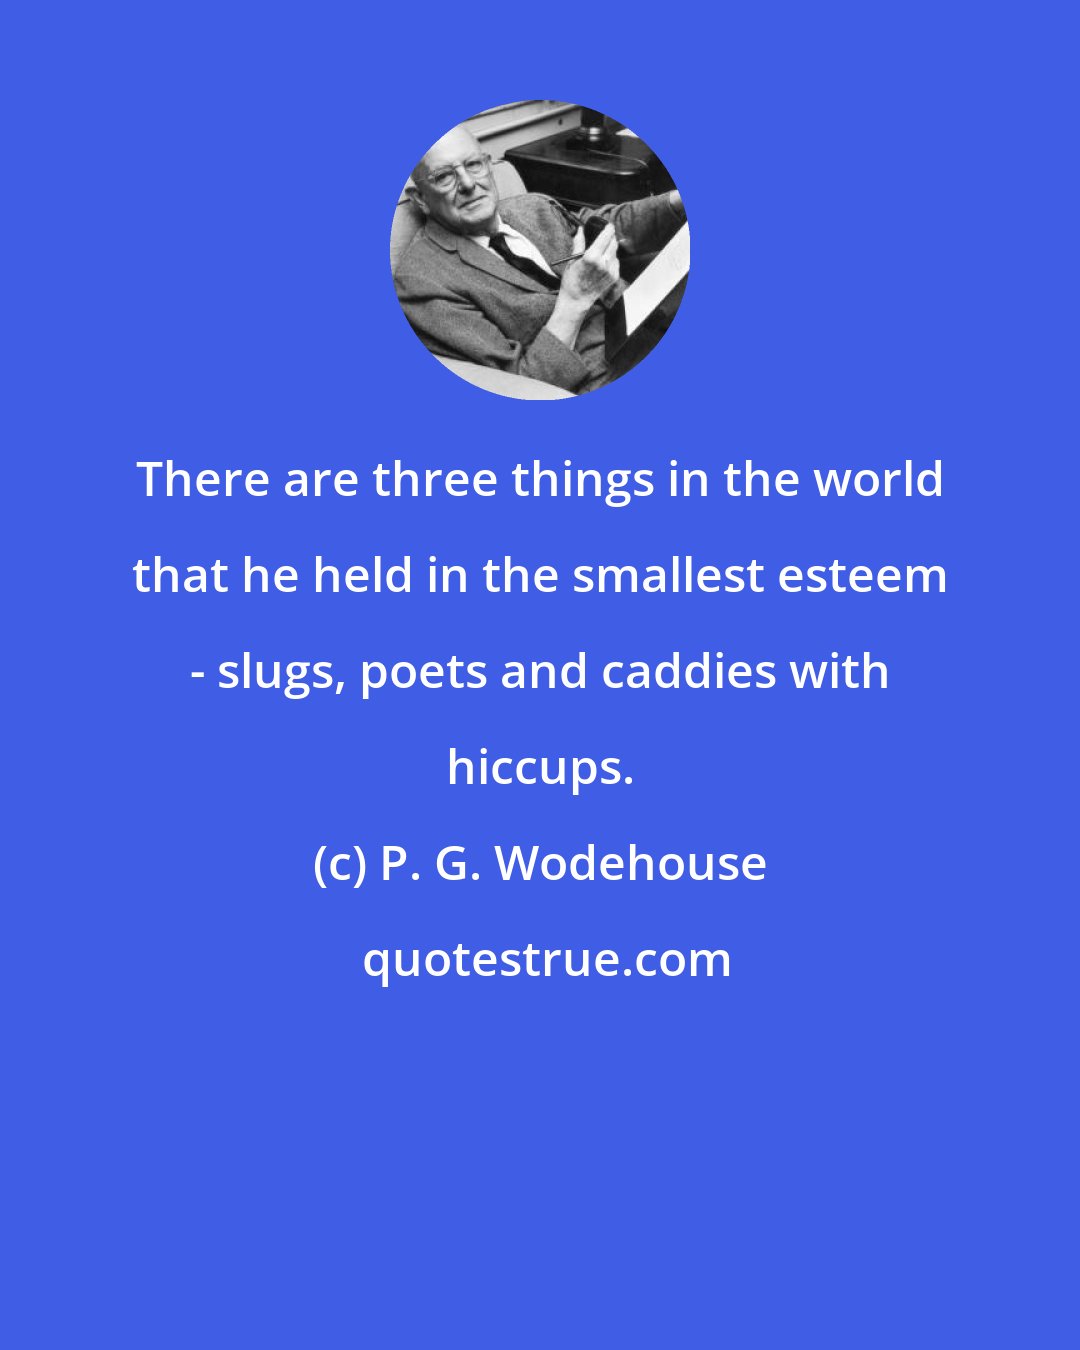 P. G. Wodehouse: There are three things in the world that he held in the smallest esteem - slugs, poets and caddies with hiccups.